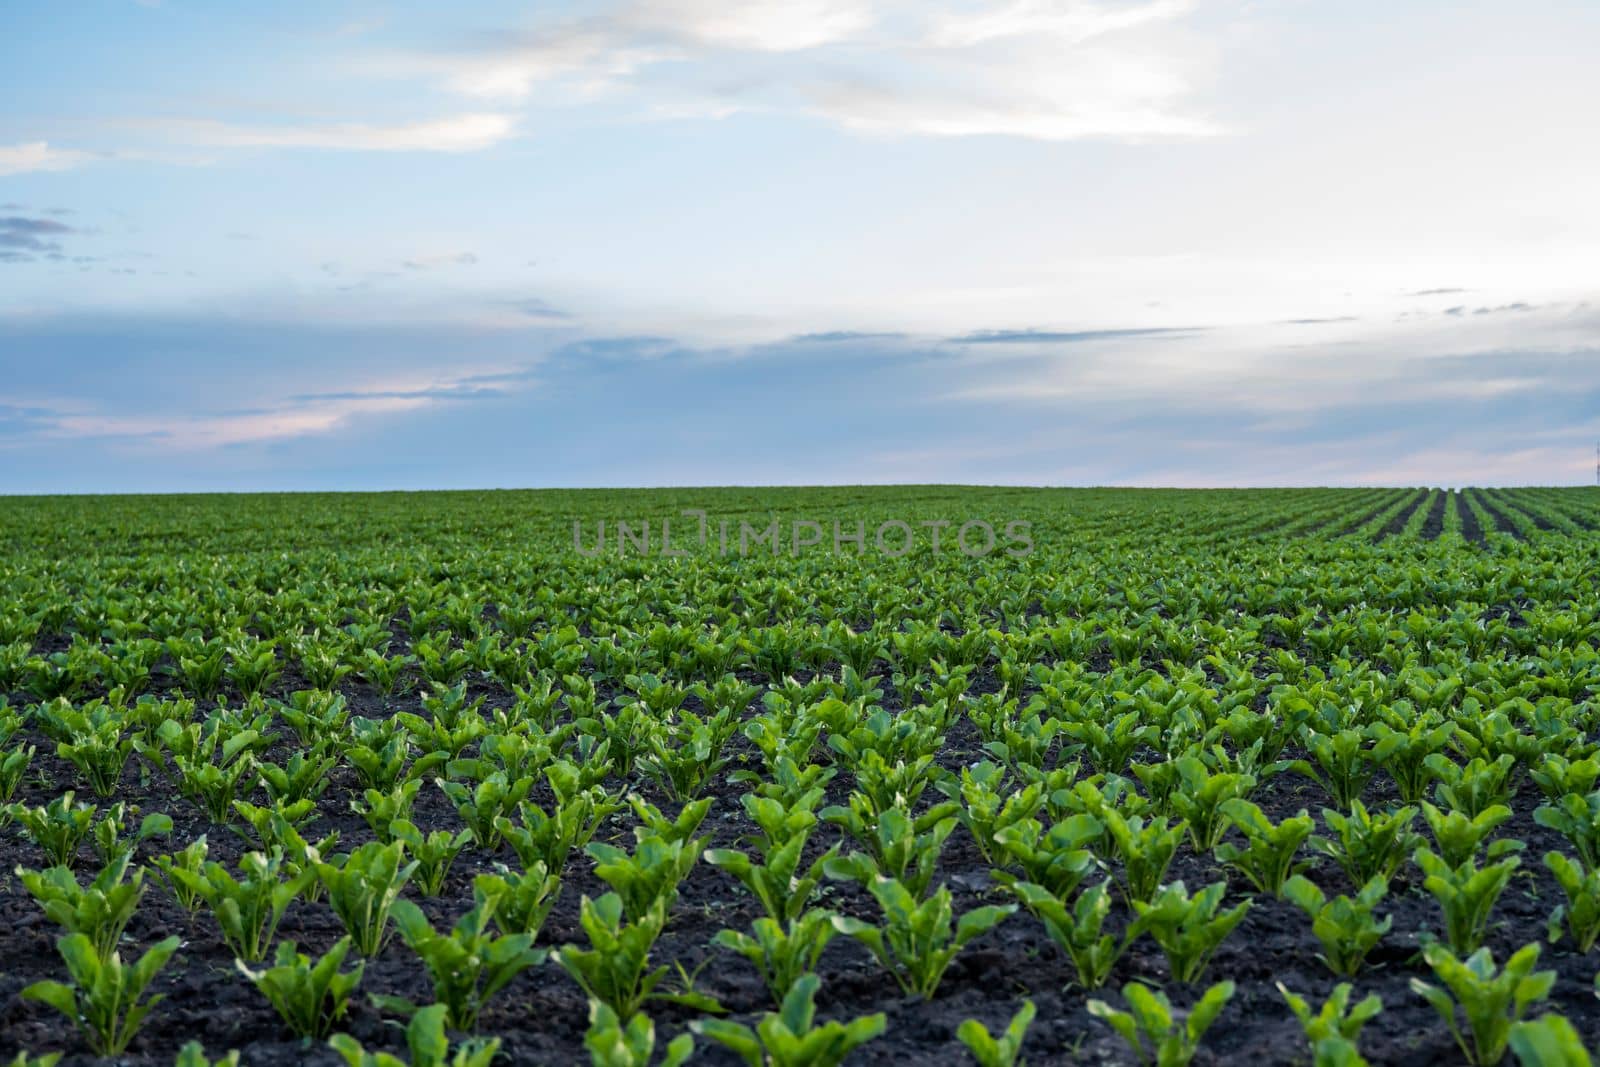 Beet root sprouts. Beetroot seedling in fertile soil on the agricultural field with blue sky. Agriculture, healthy eating, organic food, growing, cornfield